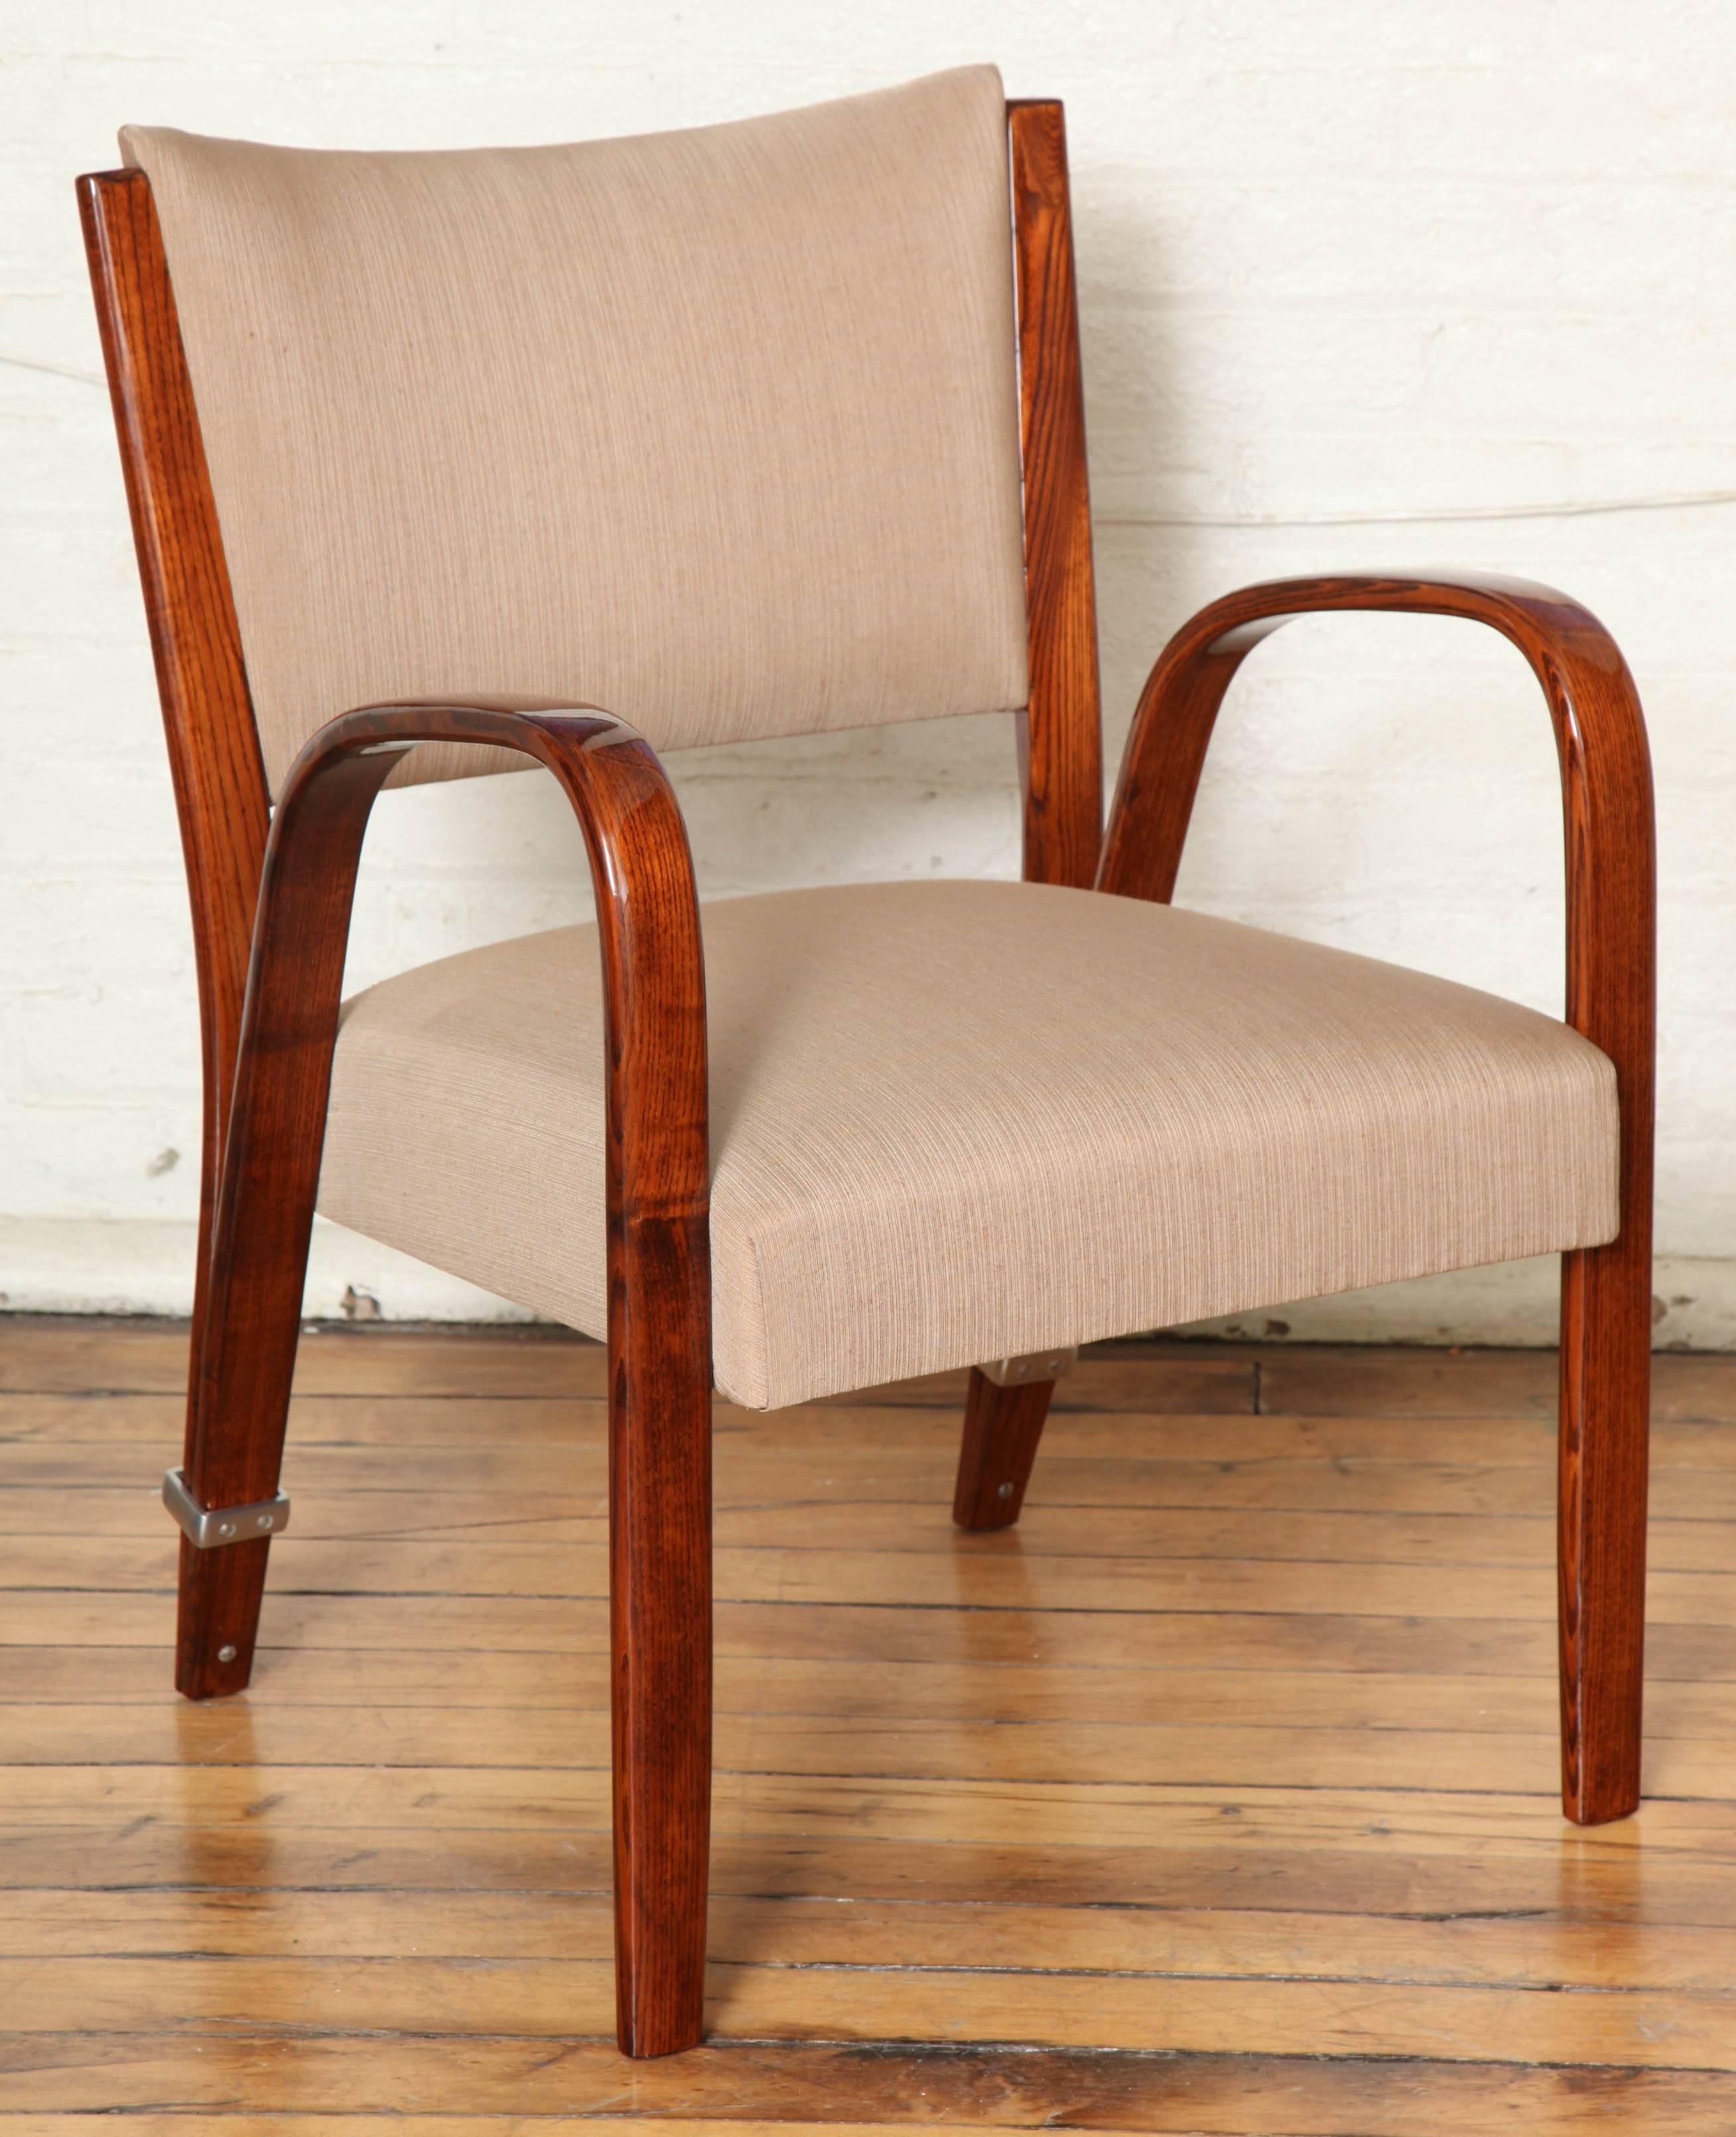 Extraordinary suite of 12 dining chairs and two host or hostess armchairs by Steiner. Unique design in walnut bentwood with metal detail typical to Steiner designs. Chairs are priced and sold individually. Will reupholster at no charge COM.